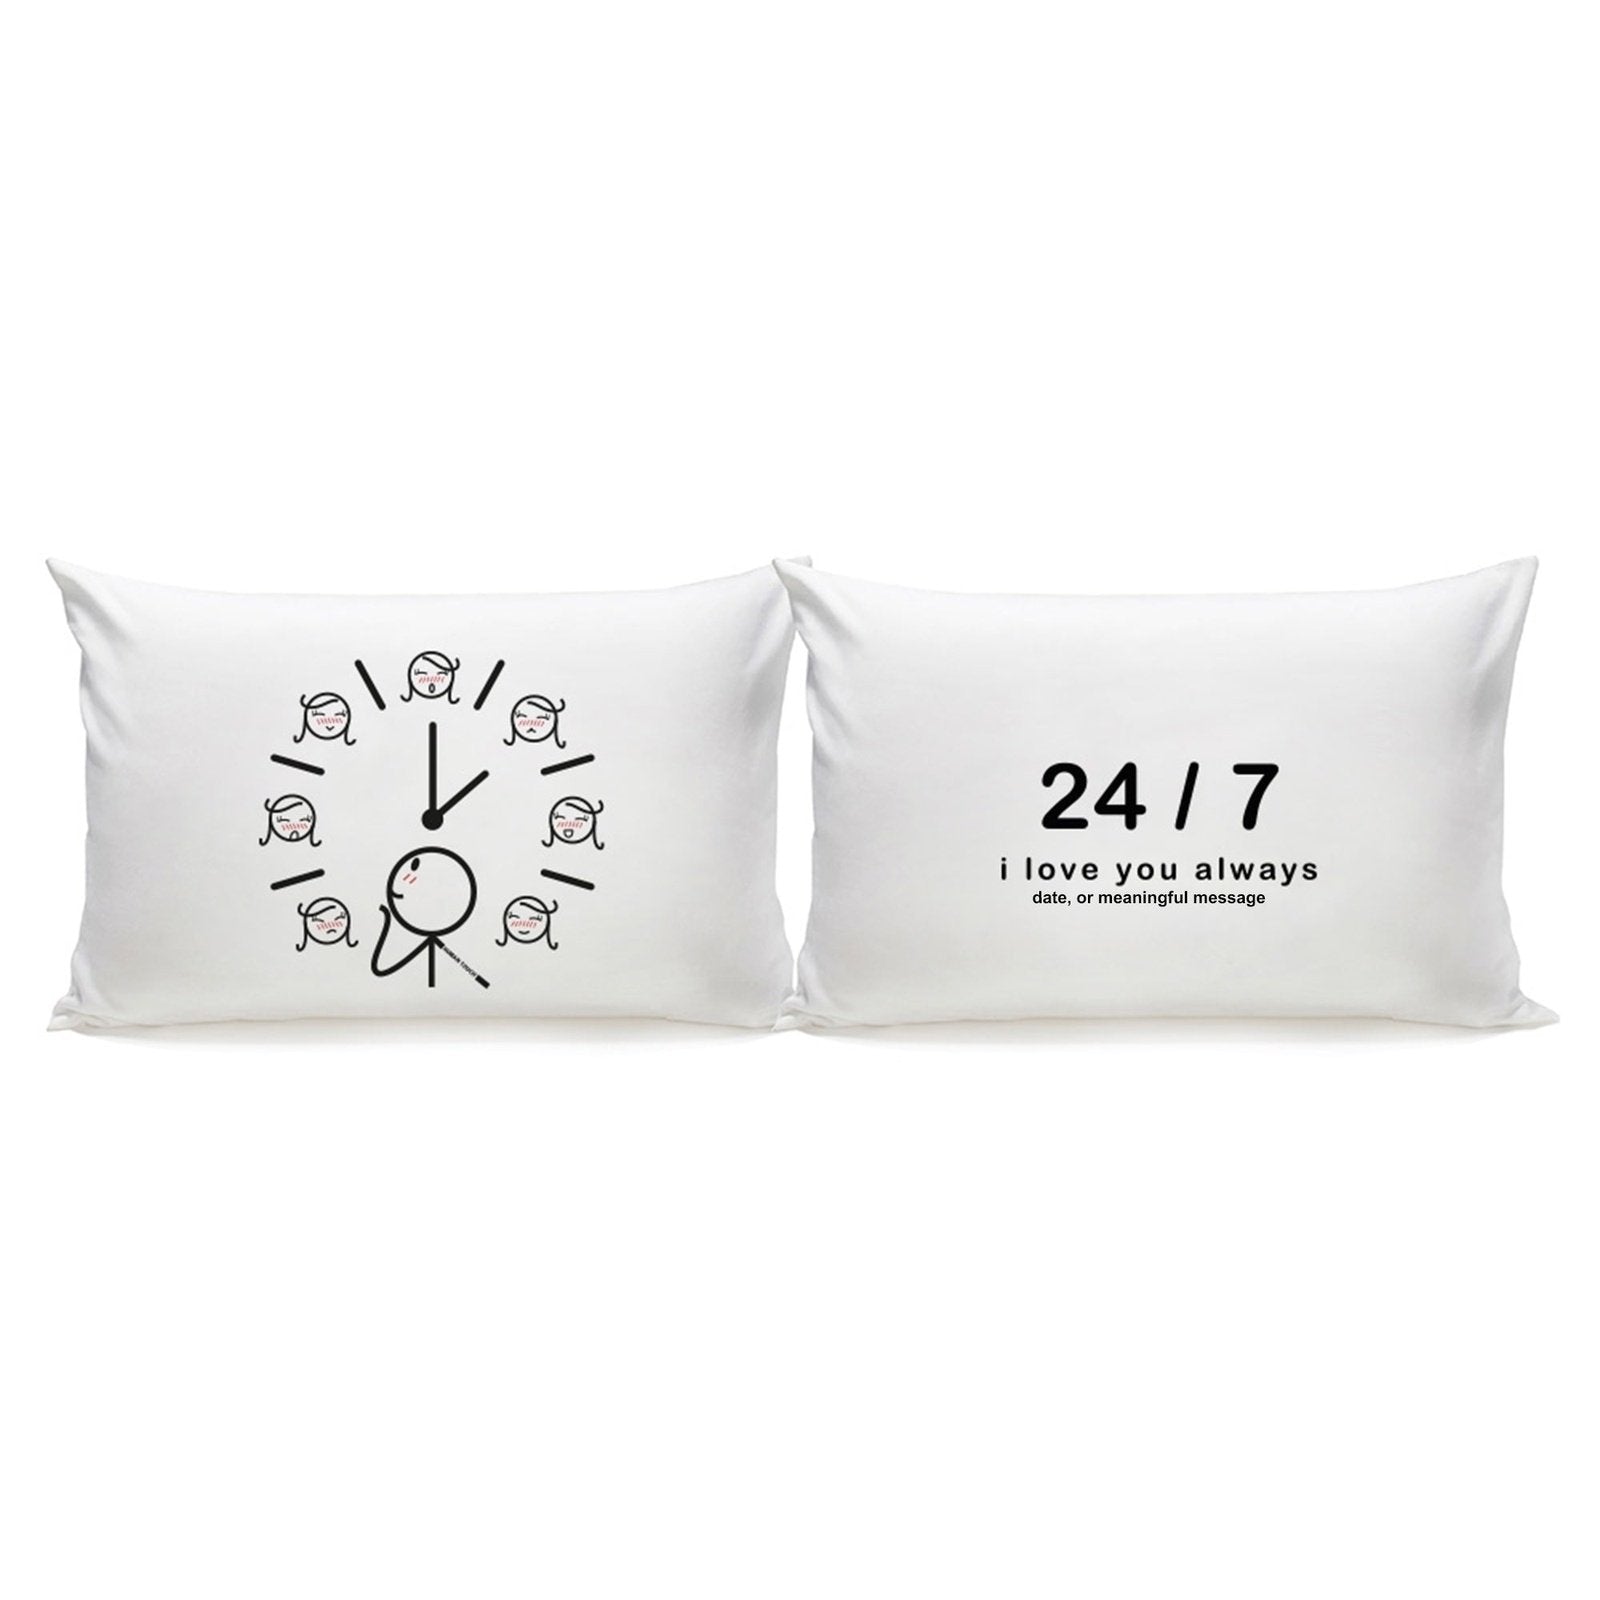 How about: Celebrate love with adorable pillow clocks, perfect for couples seeking unique anniversary and gift ideas for him and her.